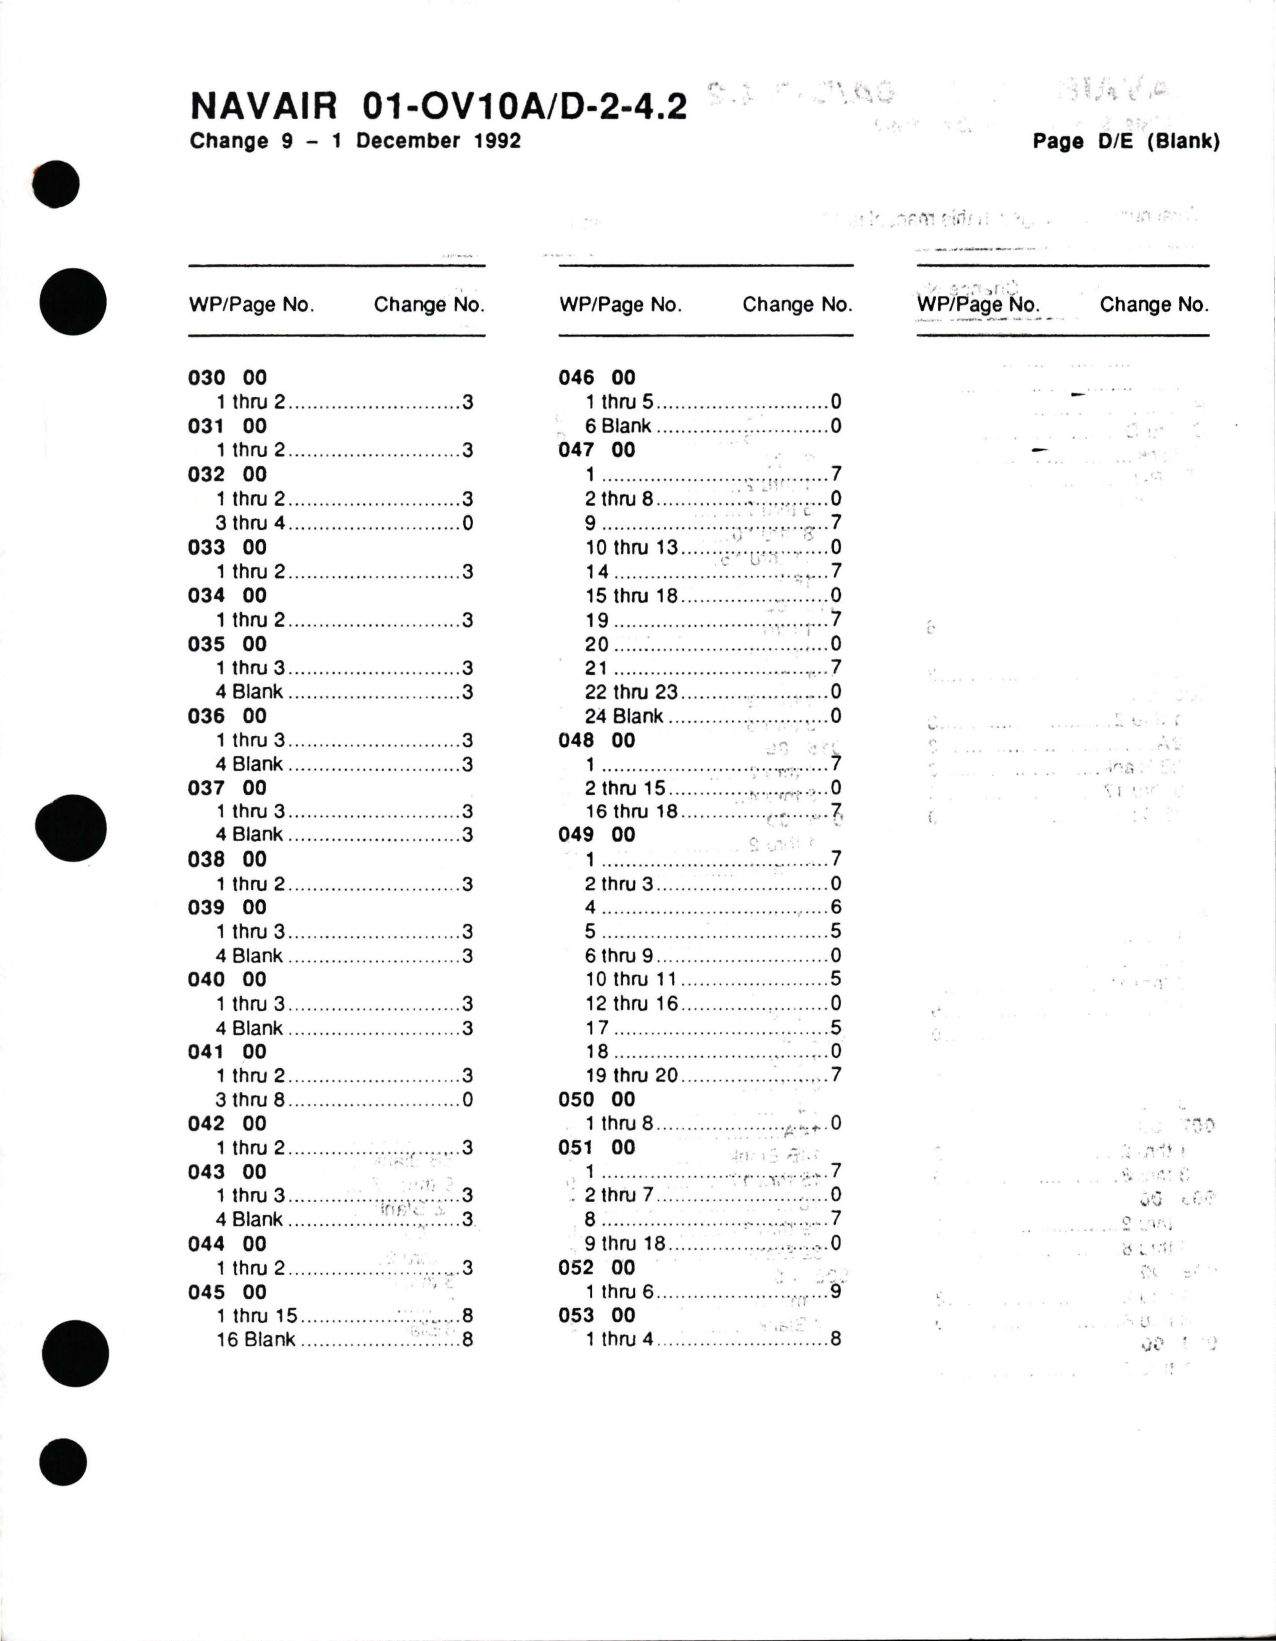 Sample page 5 from AirCorps Library document: Organizational Maintenance with Illustrated Parts Breakdown for Fuel Systems on the OV-10A/D